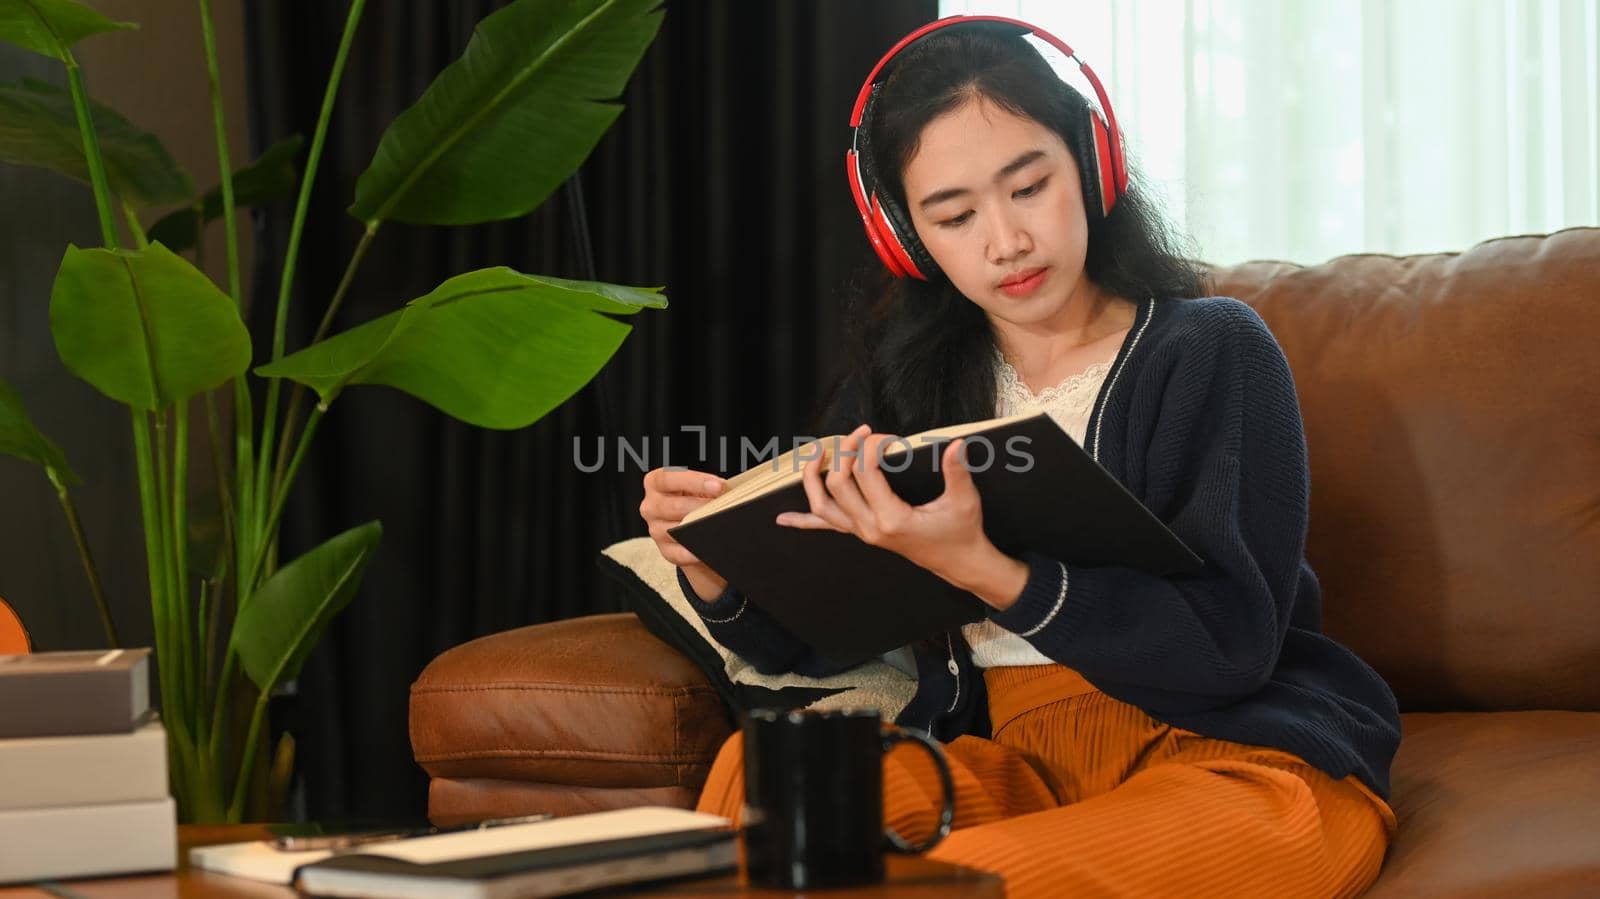 Satisfied young woman listening to music in headphone and reading book on couch at home. Leisure activity, positive mood concept.